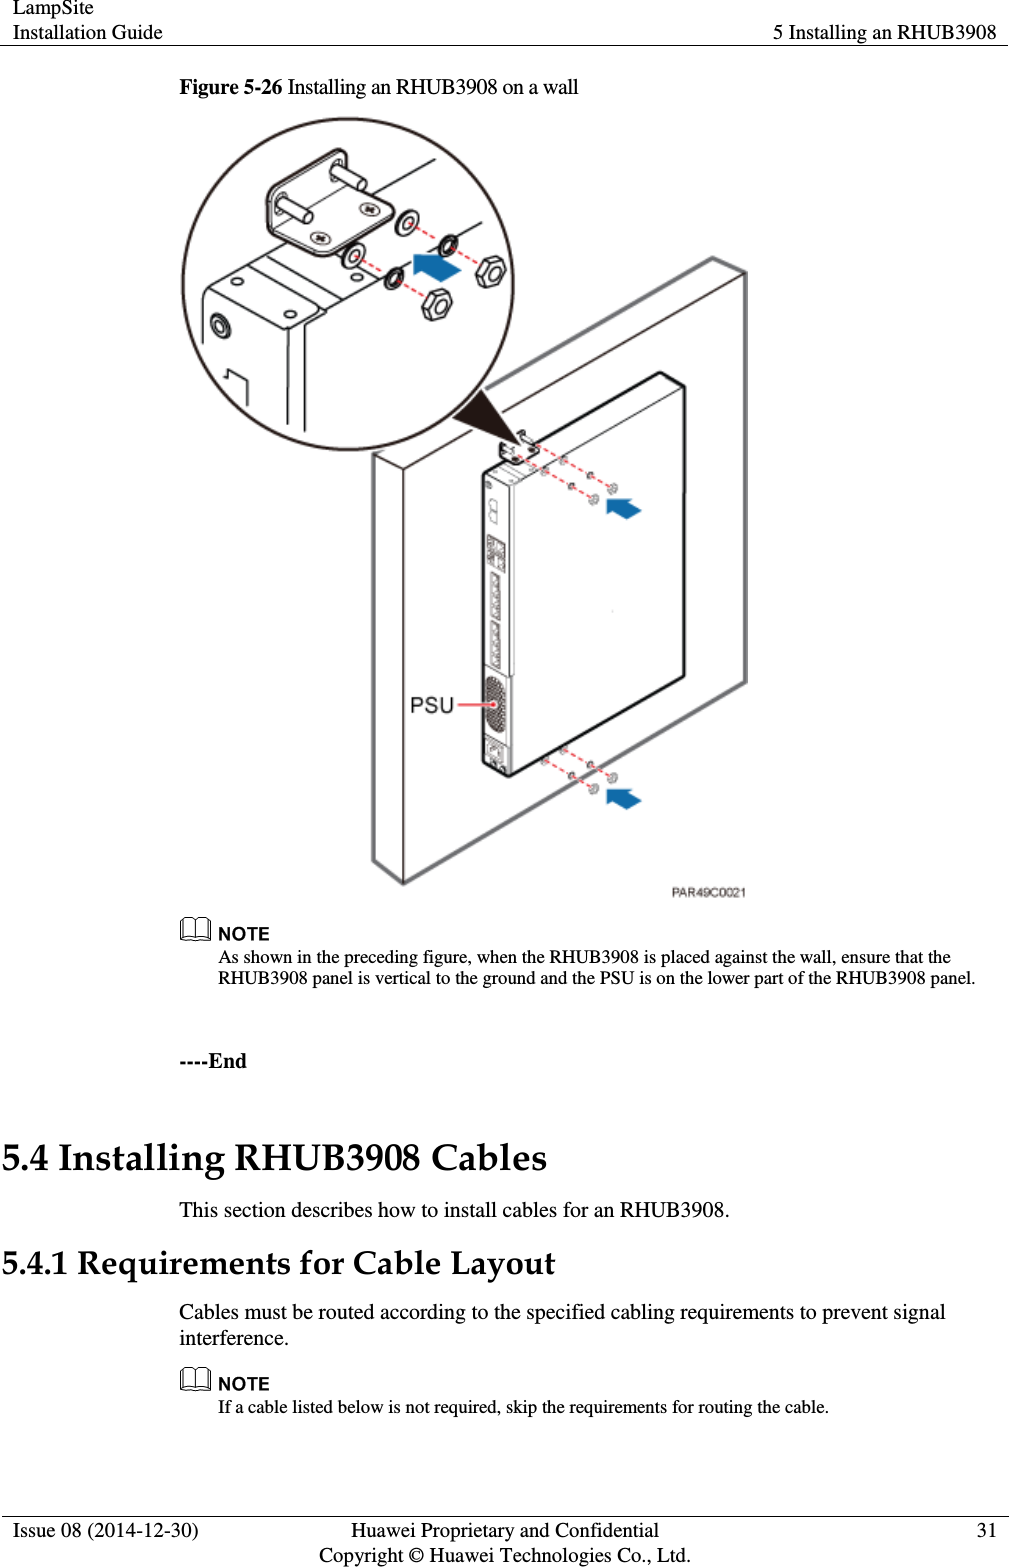 LampSite Installation Guide 5 Installing an RHUB3908  Issue 08 (2014-12-30) Huawei Proprietary and Confidential                                     Copyright © Huawei Technologies Co., Ltd. 31  Figure 5-26 Installing an RHUB3908 on a wall   As shown in the preceding figure, when the RHUB3908 is placed against the wall, ensure that the RHUB3908 panel is vertical to the ground and the PSU is on the lower part of the RHUB3908 panel.    ----End 5.4 Installing RHUB3908 Cables This section describes how to install cables for an RHUB3908.   5.4.1 Requirements for Cable Layout Cables must be routed according to the specified cabling requirements to prevent signal interference.  If a cable listed below is not required, skip the requirements for routing the cable.   